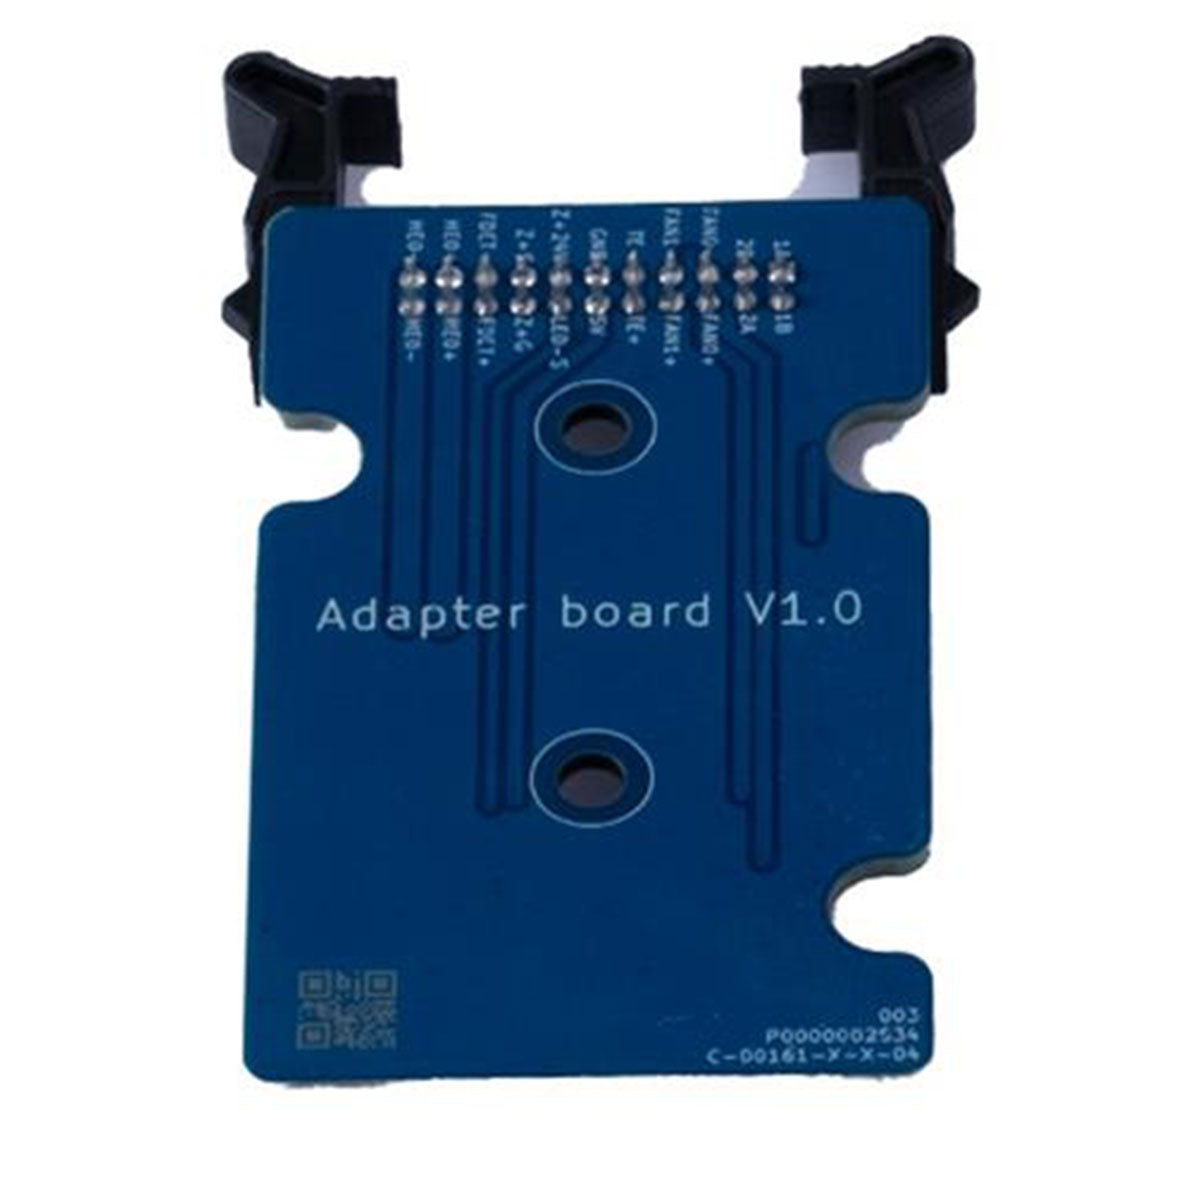 Extruder Adapter Plate - X4 Plus